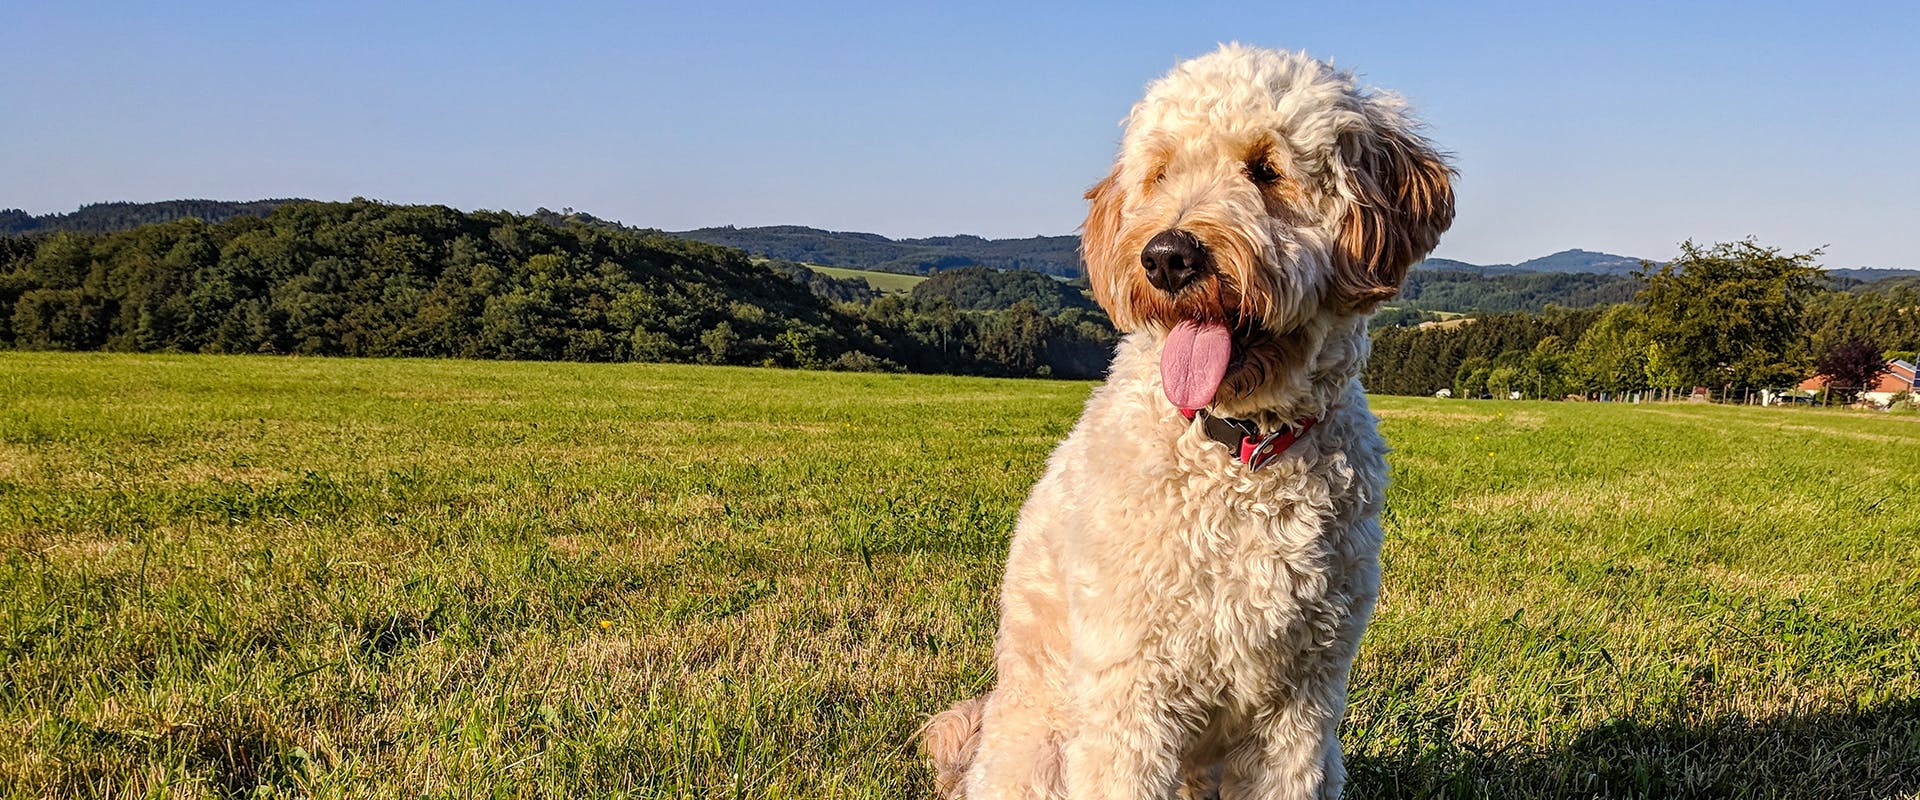 A Goldendoodle sitting outdoors in a large field